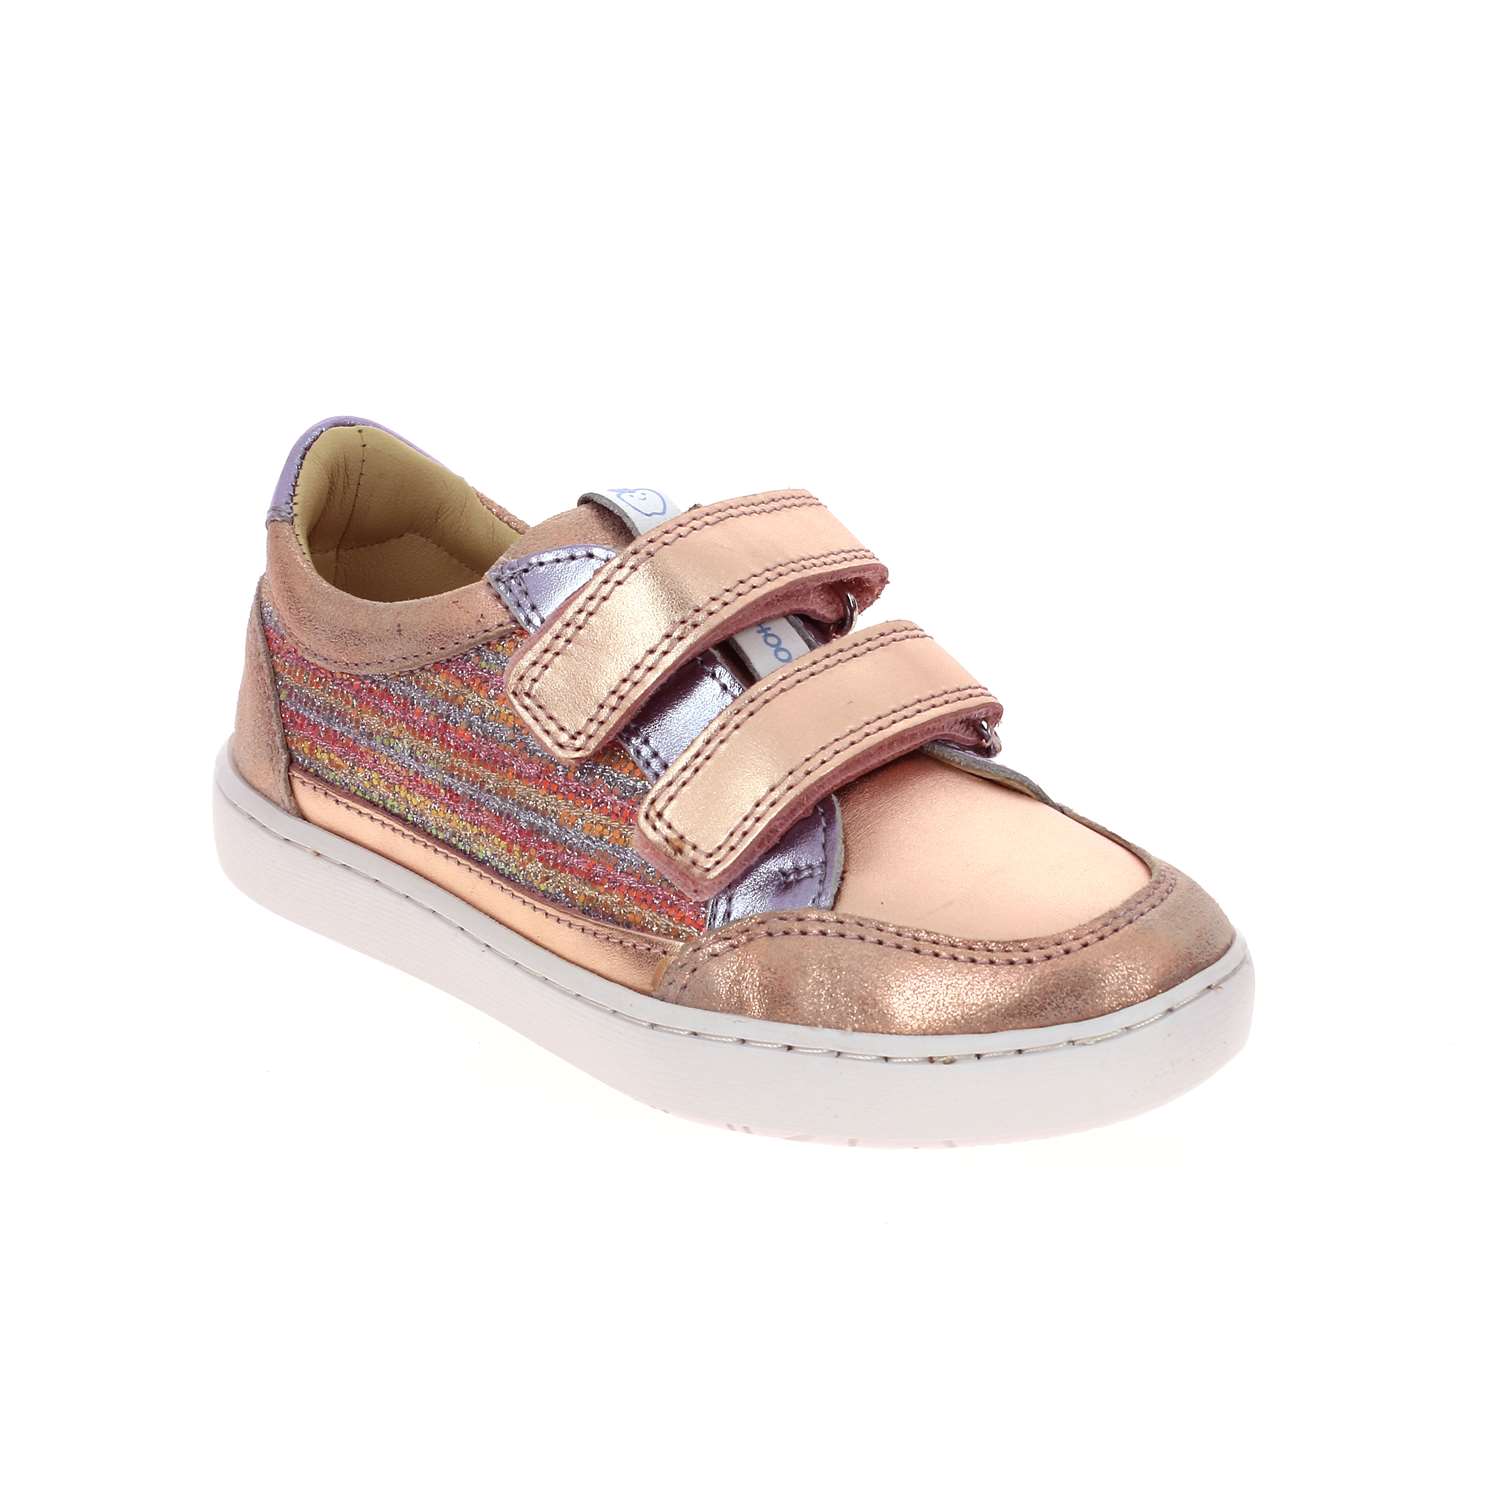 01 - PLAY SCRATCH - SHOO POM - Chaussures basses - Cuir